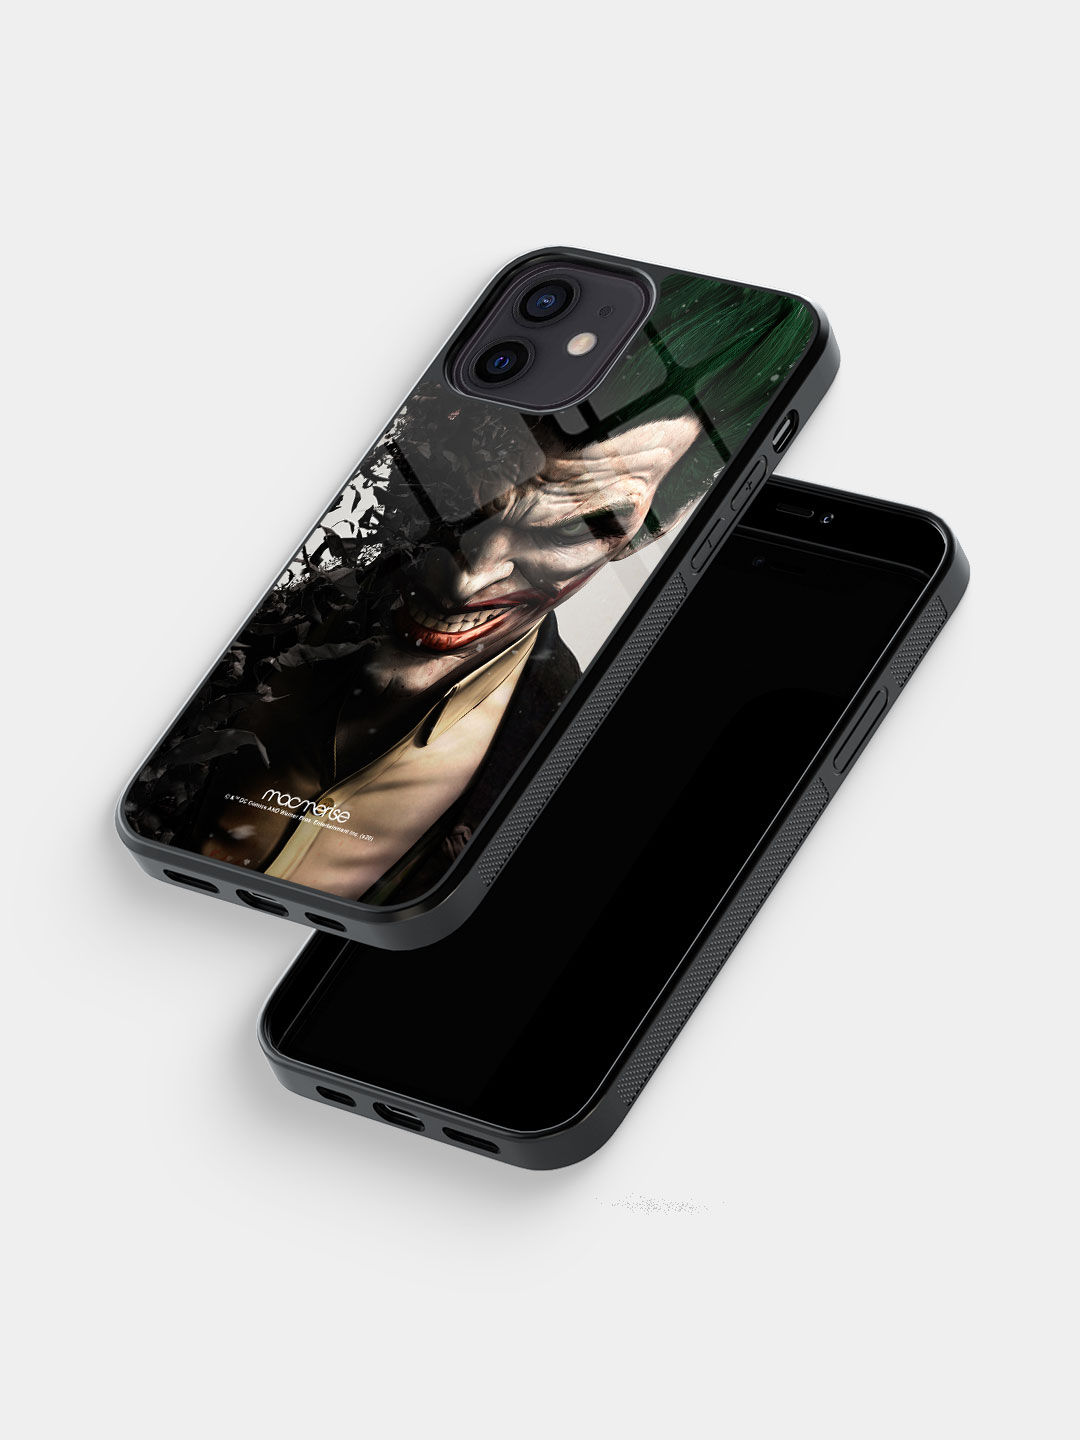 Joker Withers - Glass Case For iPhone 12 Mini